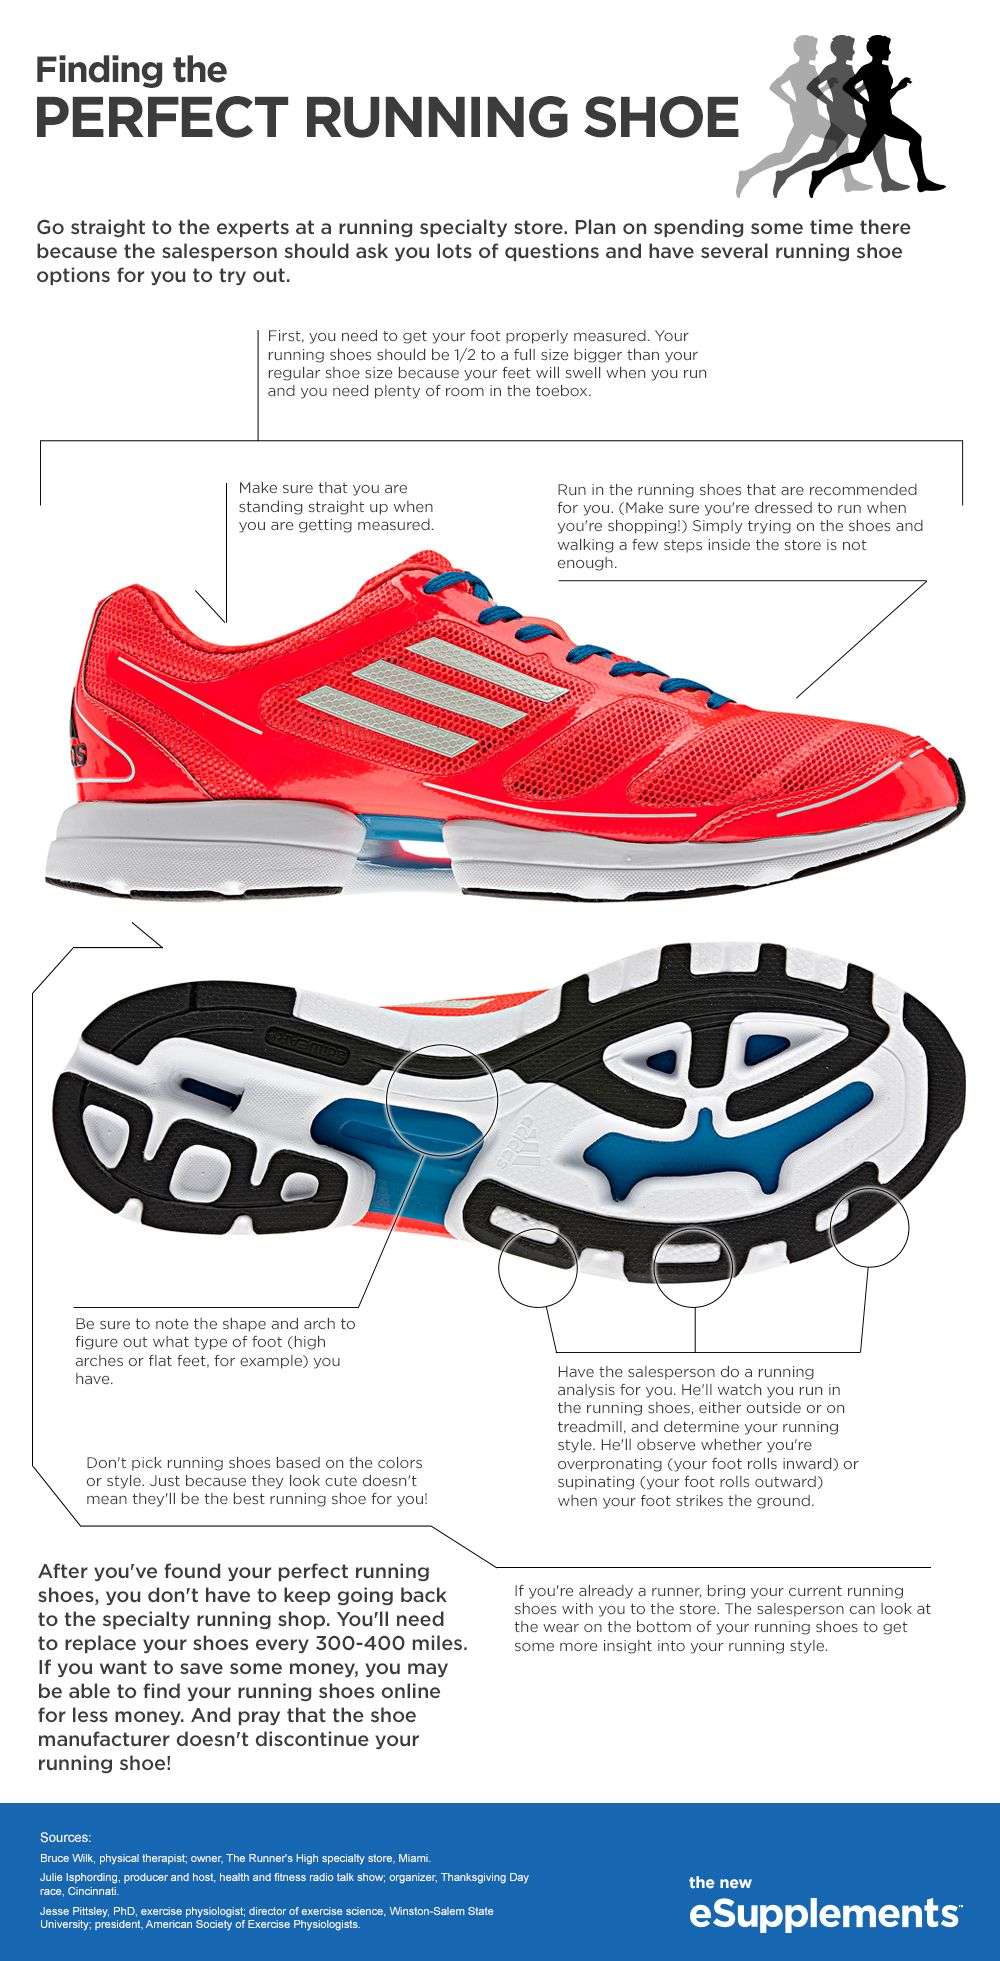 How To Find the Perfect Running Shoe #Infographics #fitness